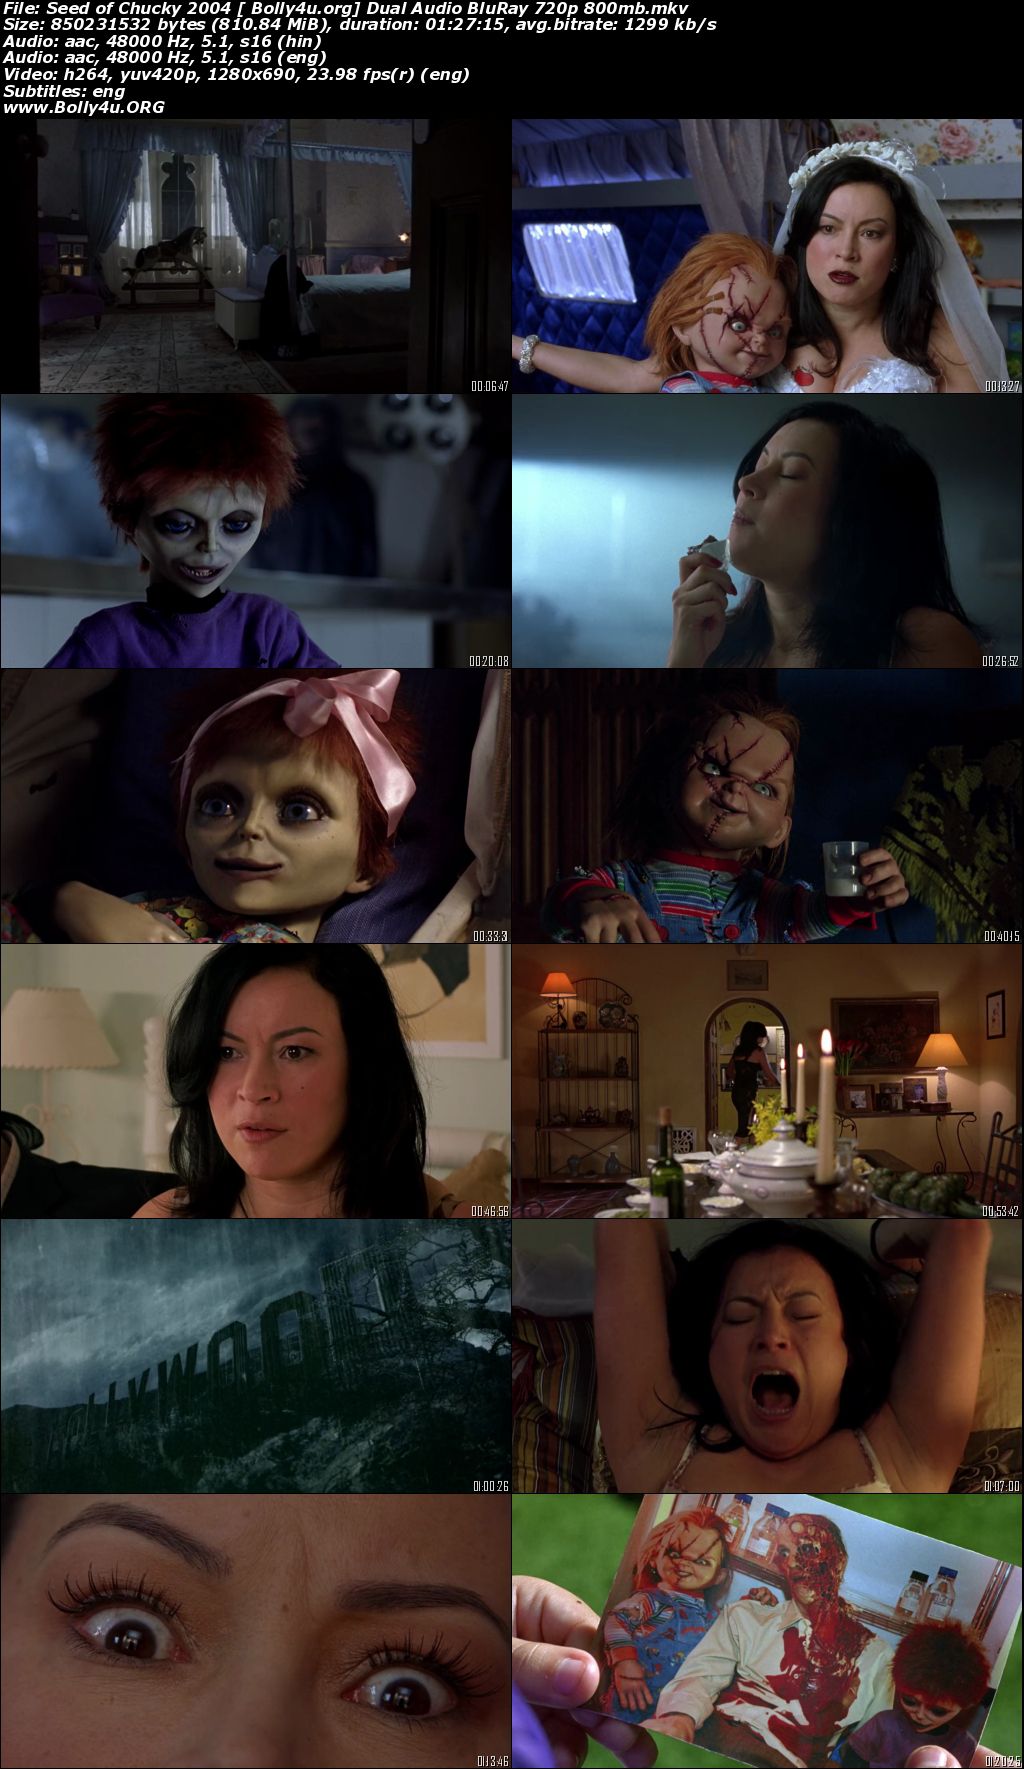 Seed of Chucky 2004 BluRay 800Mb UNRATED Hindi Dual Audio 720p Download